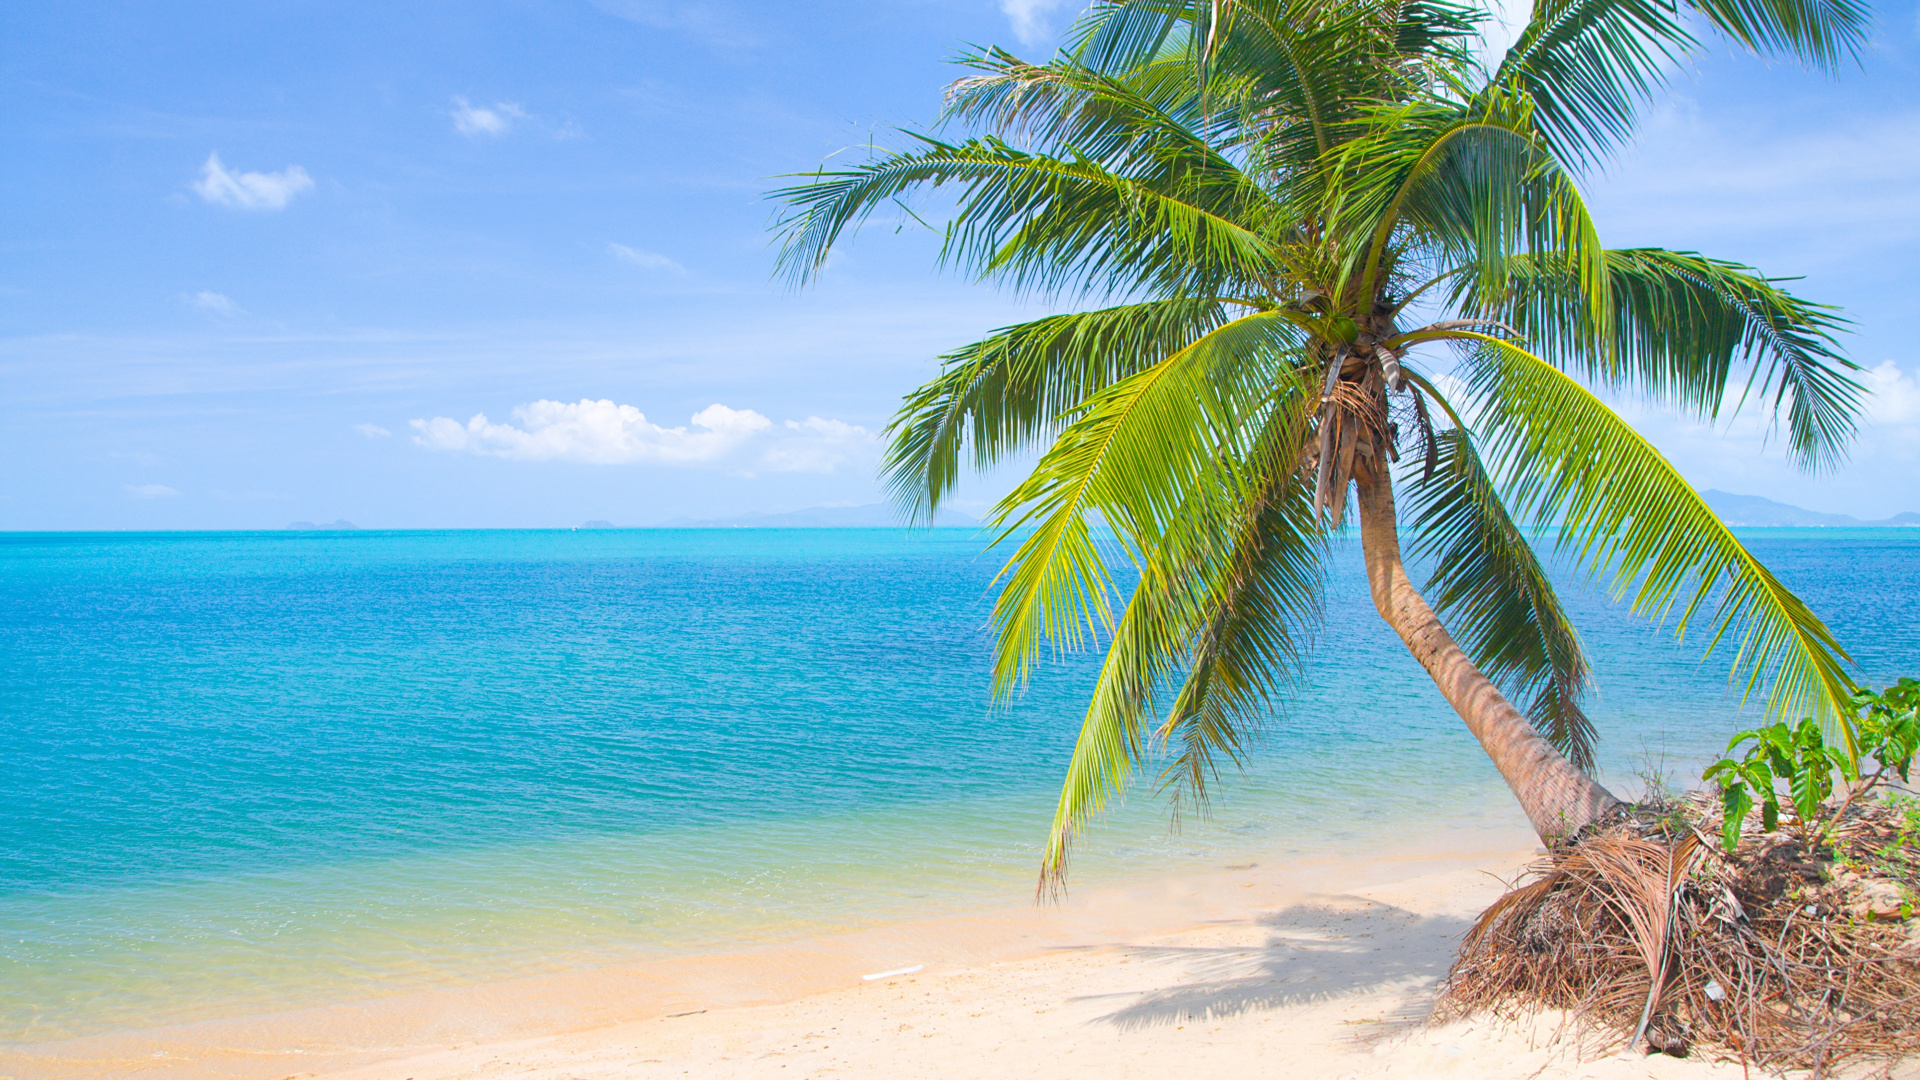 Green Palm Tree on Beach During Daytime. Wallpaper in 1920x1080 Resolution